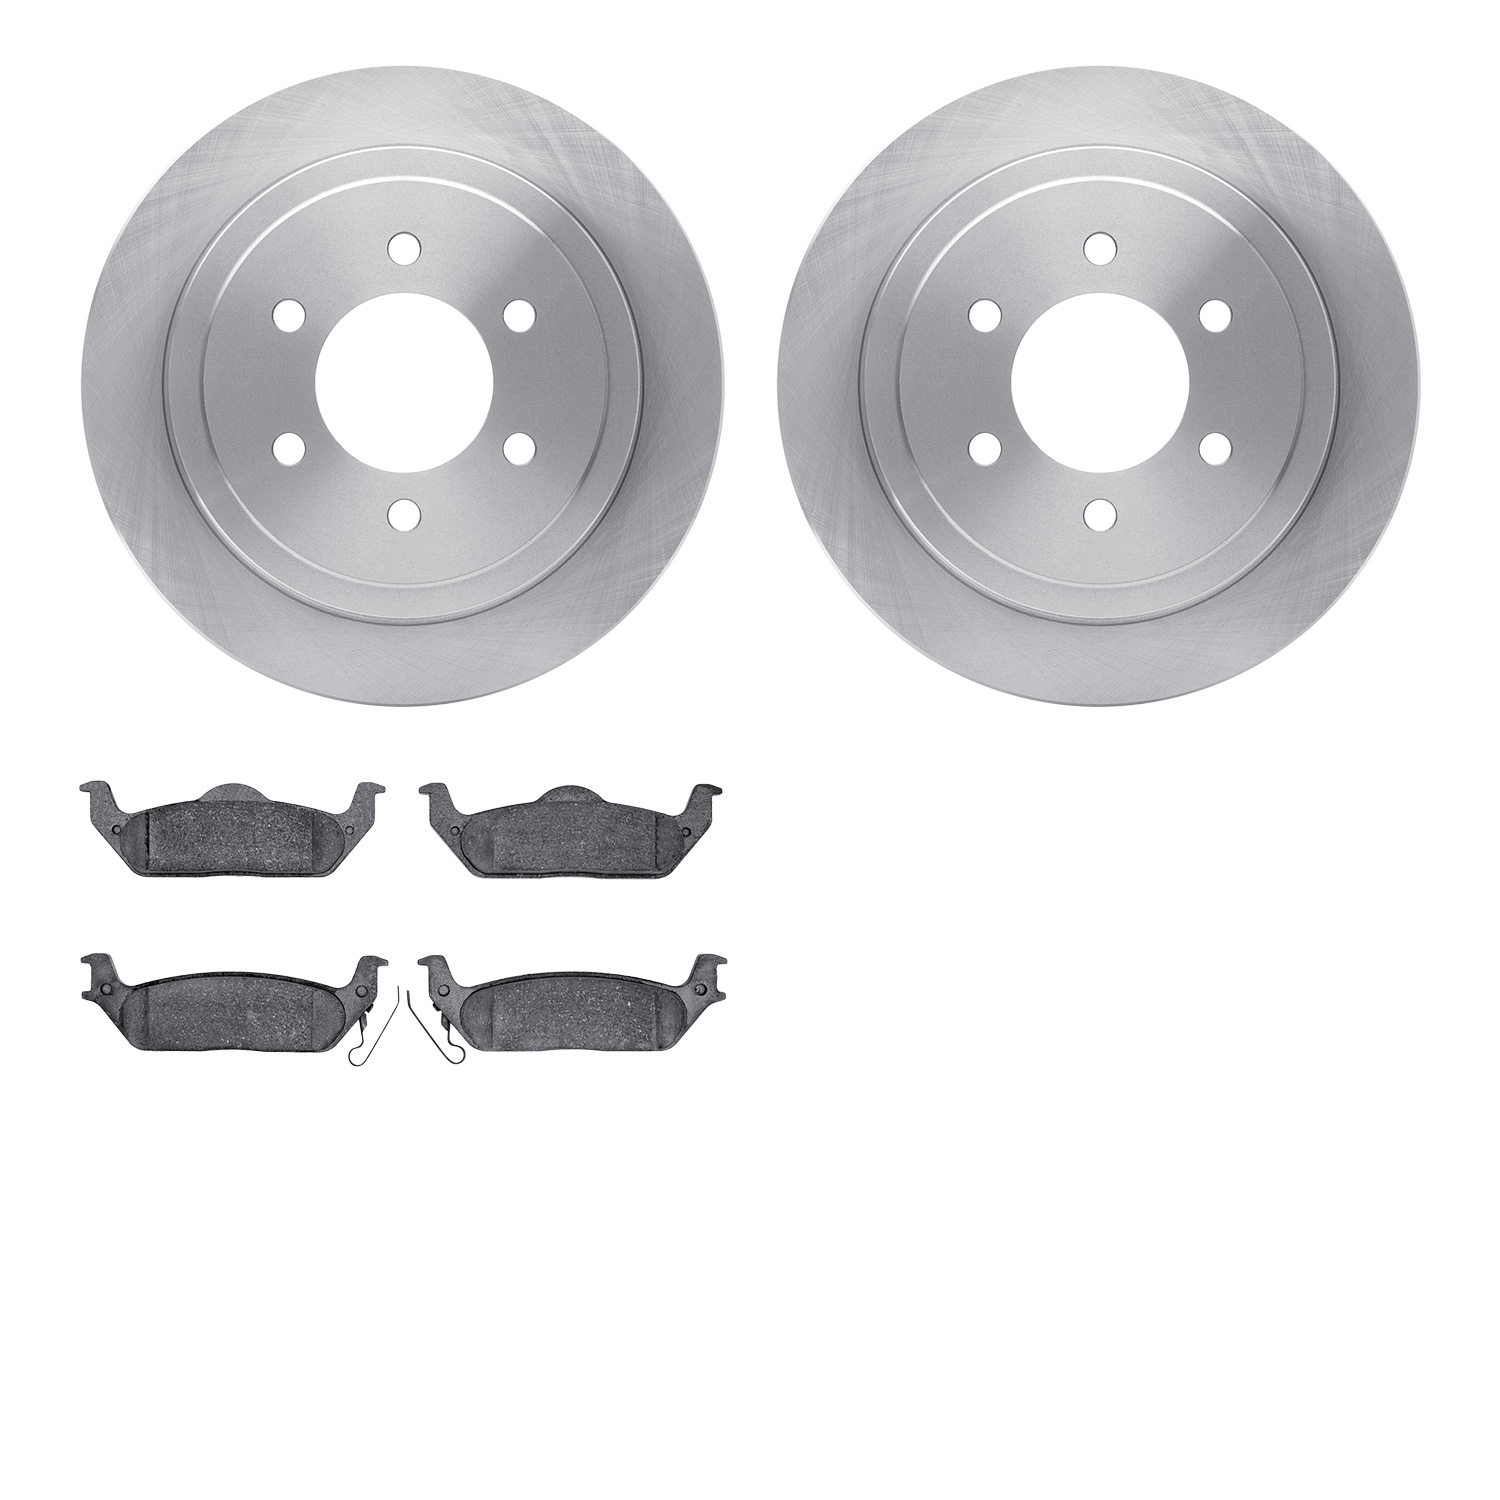 6402-54218 Brake Rotors with Ultimate-Duty Brake Pads, 2004-2011 Ford/Lincoln/Mercury/Mazda, Position: Rear